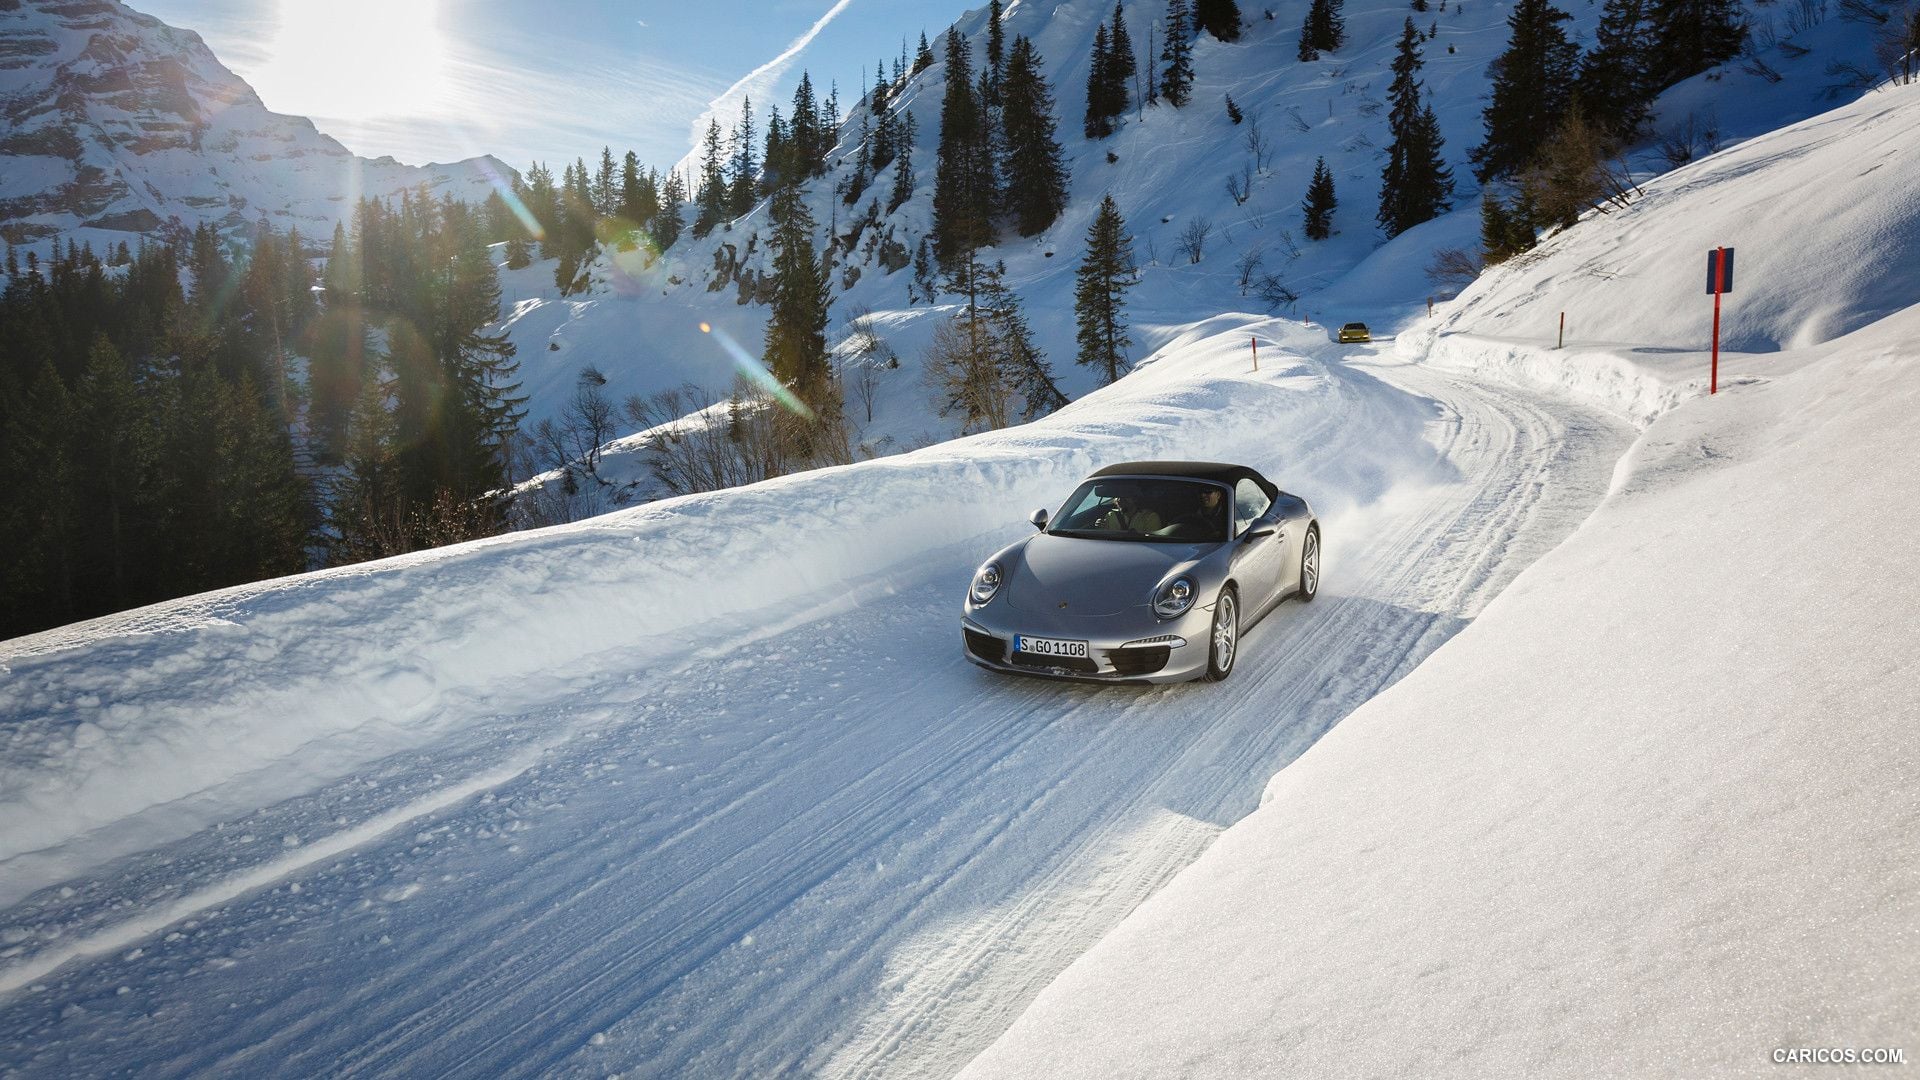 How Porsche's New Tech Keeps Electric Cars Running Smooth in the Cold: A Game Changer for Winter Driving